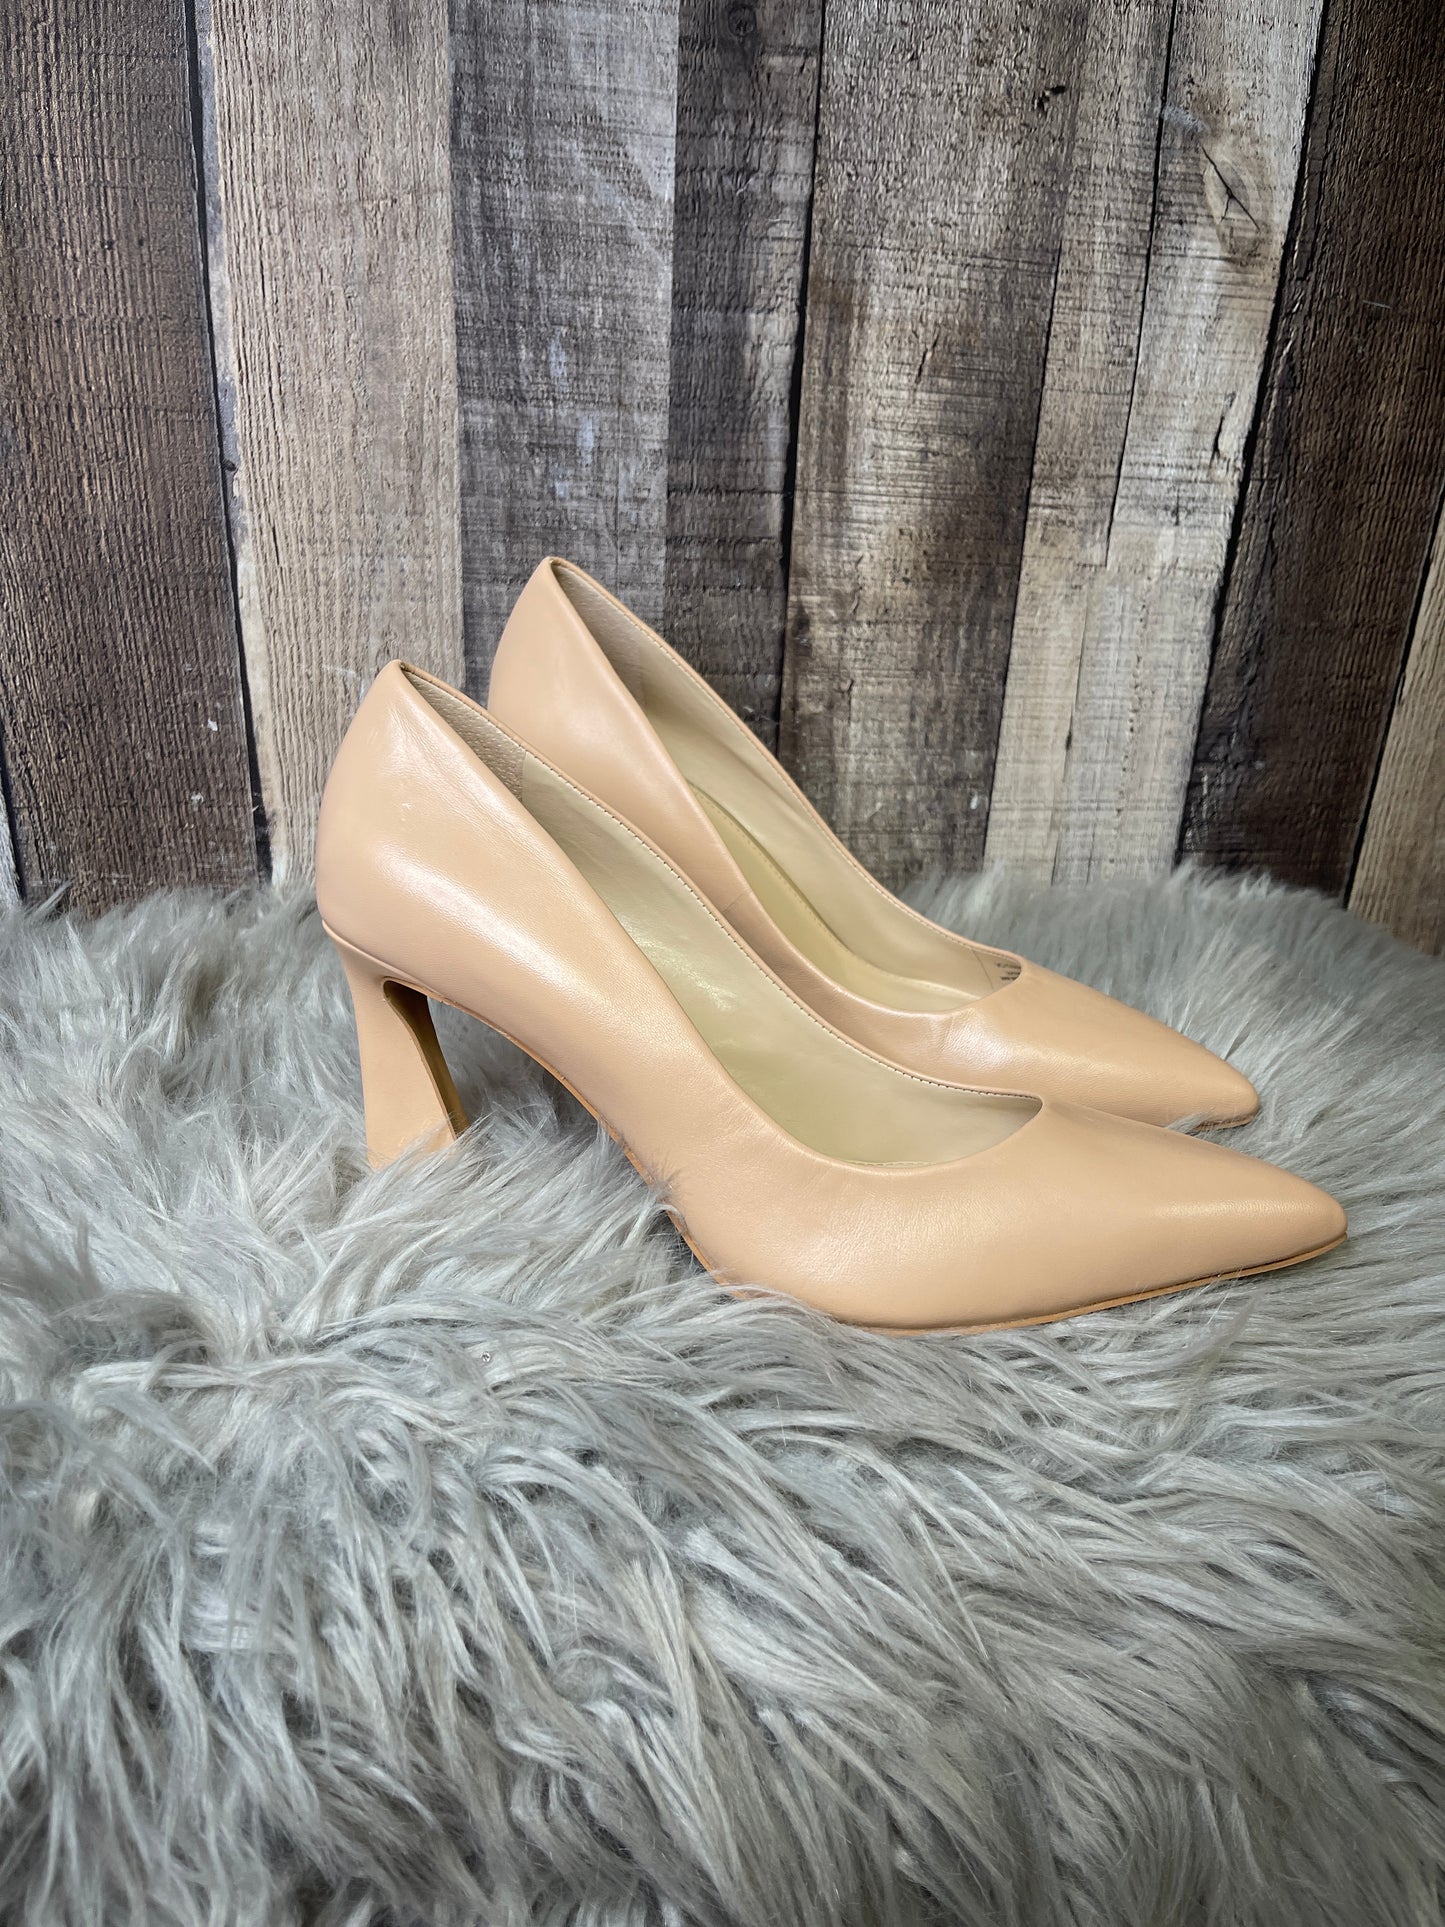 Shoes Heels Block By Vince Camuto  Size: 9.5